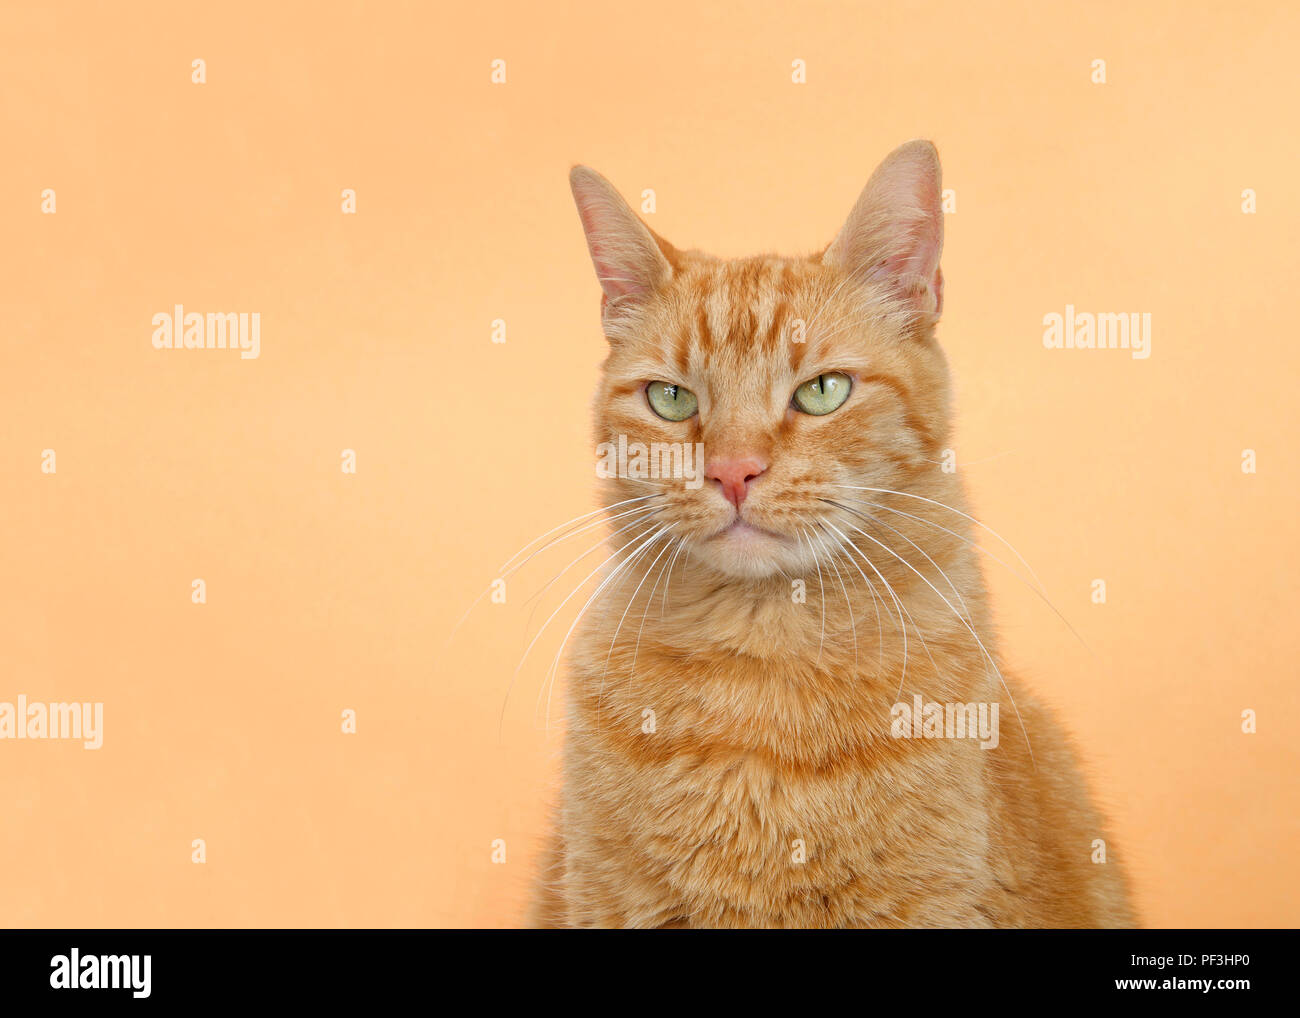 Portrait of one orange tabby ginger cat on an orange background. Looking to viewers left with serious observing expression. Copy space. Stock Photo